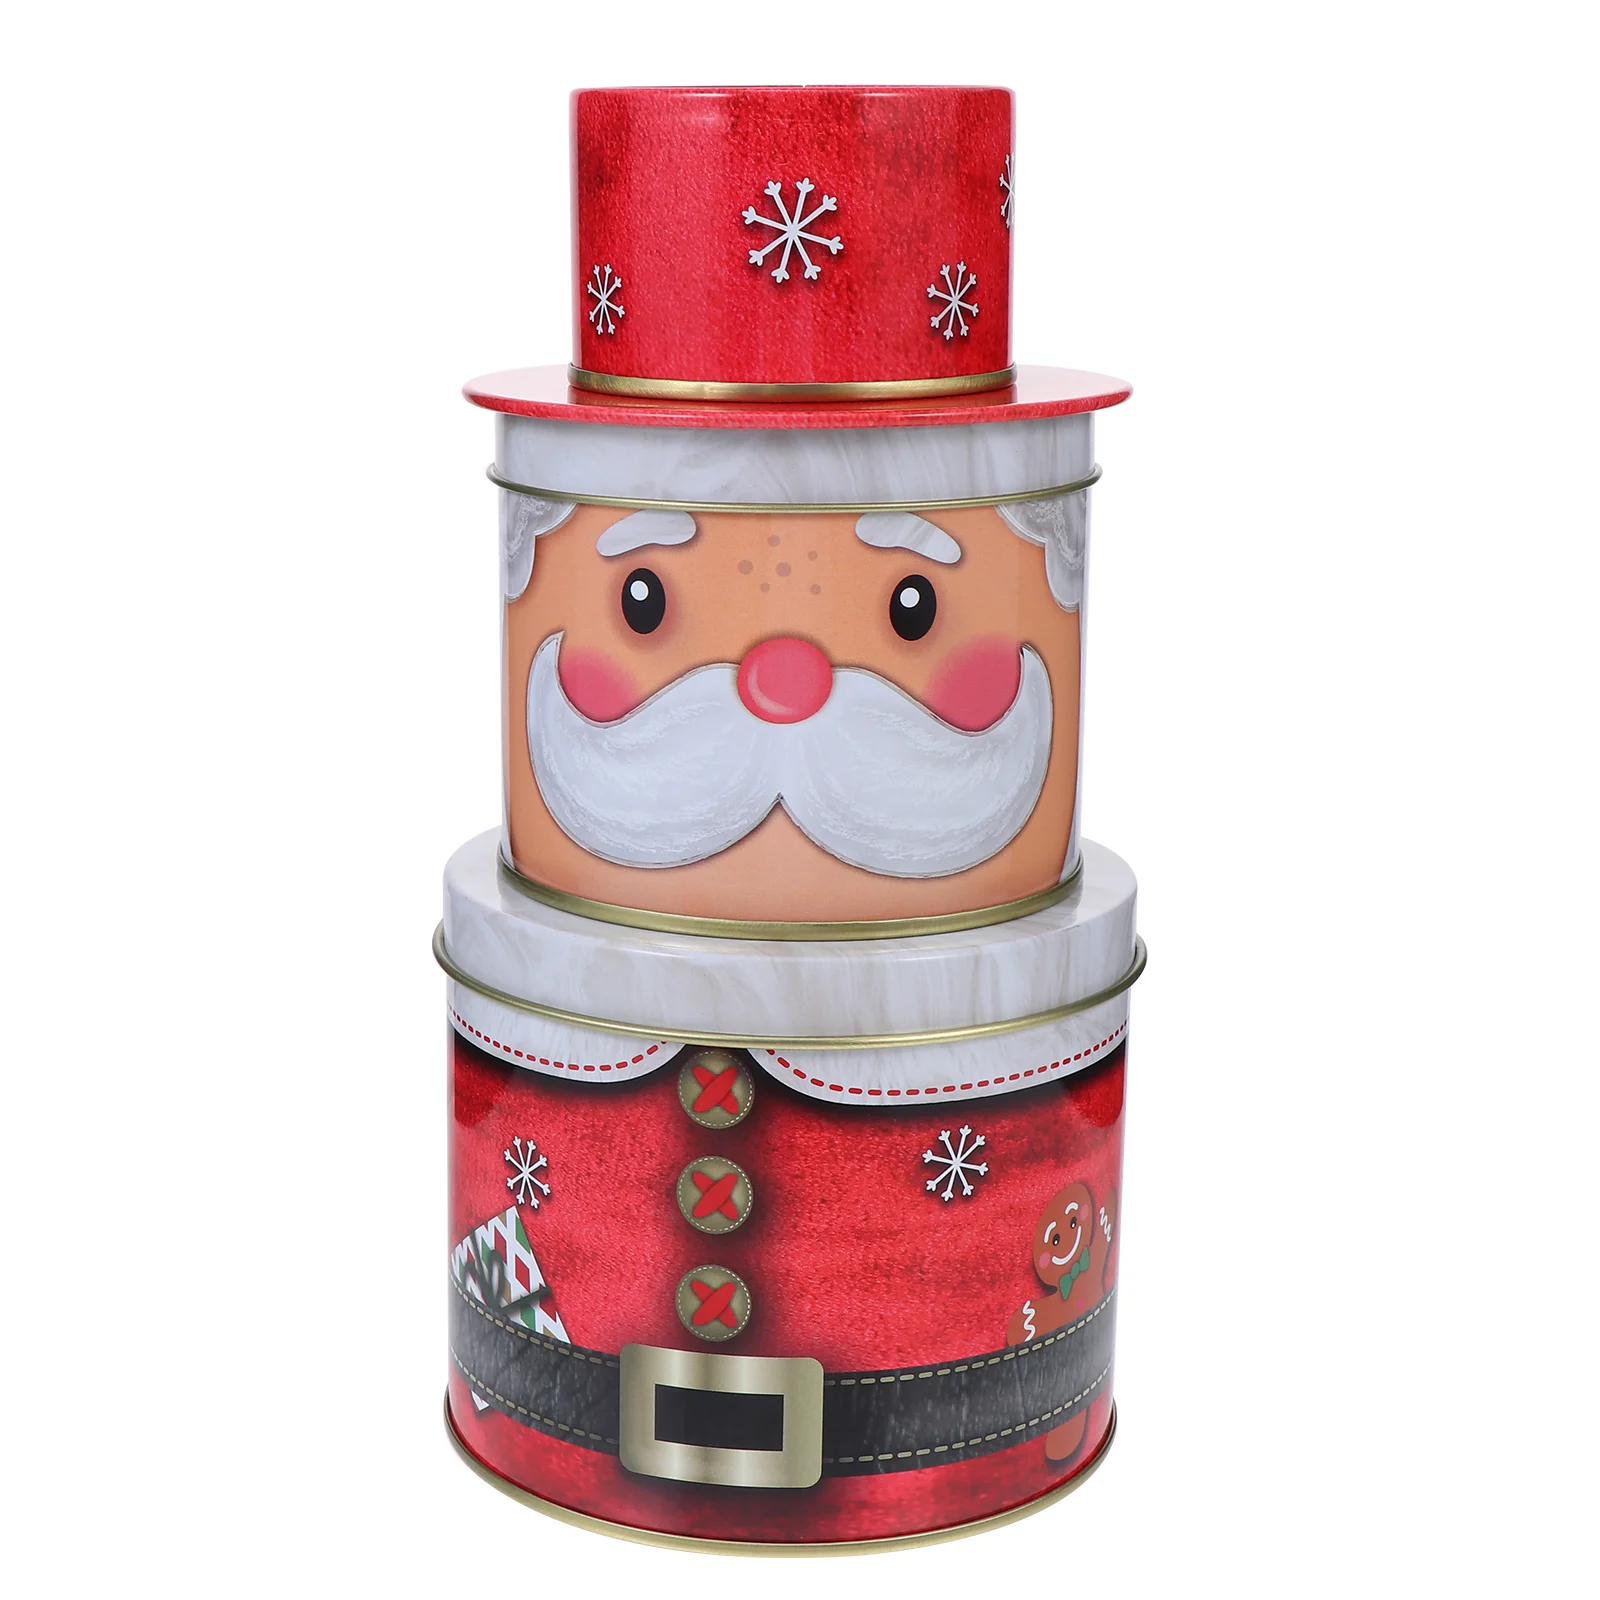 

Christmas Tin Box Tinplate Jars Baby Food Container Gift Biscuit Cans Containers Lids Cookie